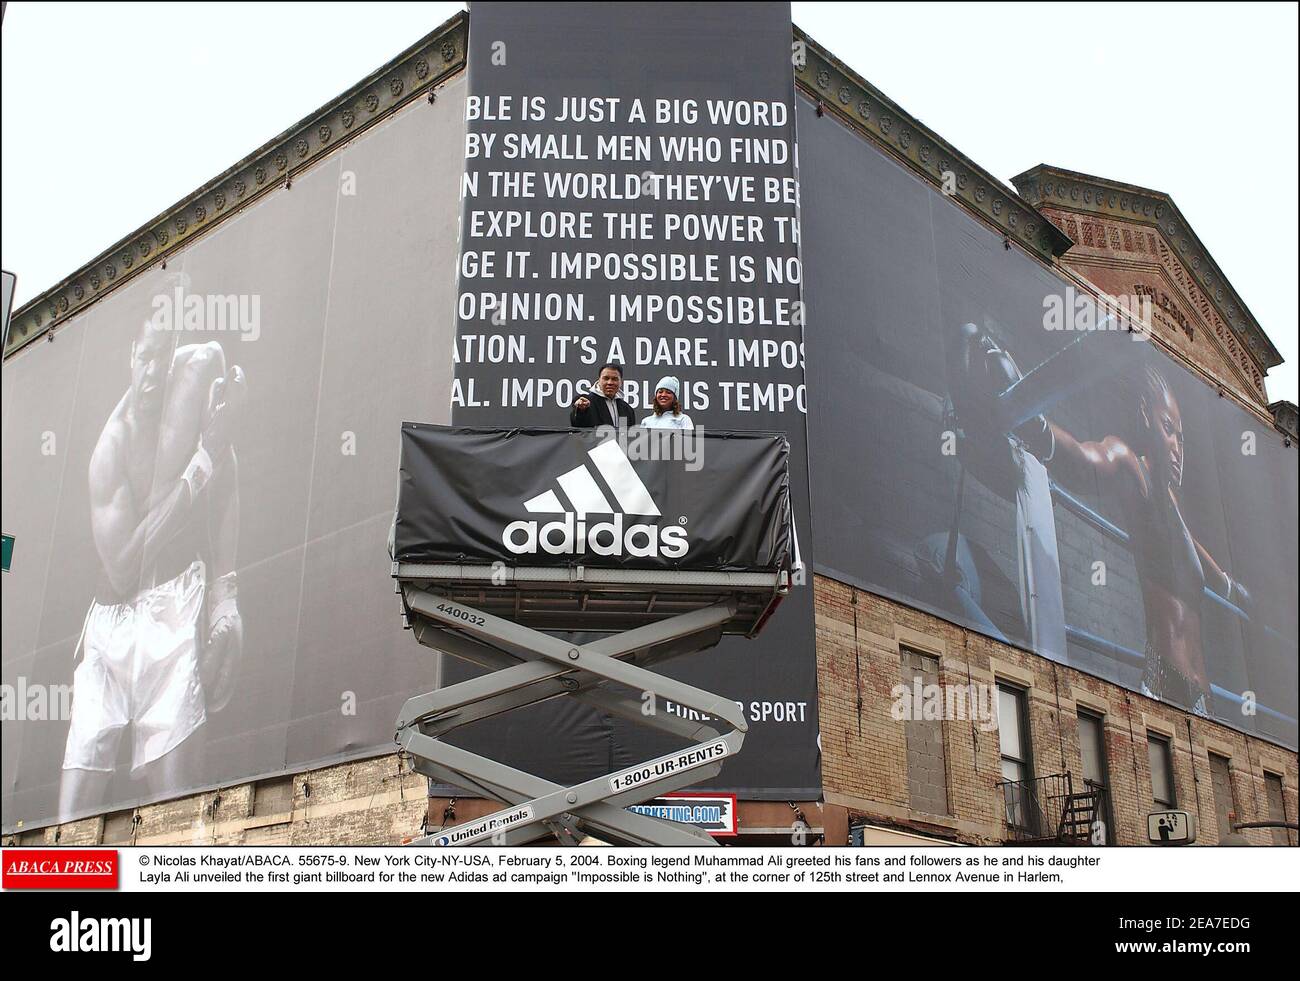 Nicolas Khayat/ABACA. 55675-9. New York City-NY-USA, February 5, 2004.  Boxing legend Muhammad Ali greeted his fans and followers as he and his  daughter Layla Ali unveiled the first giant billboard for